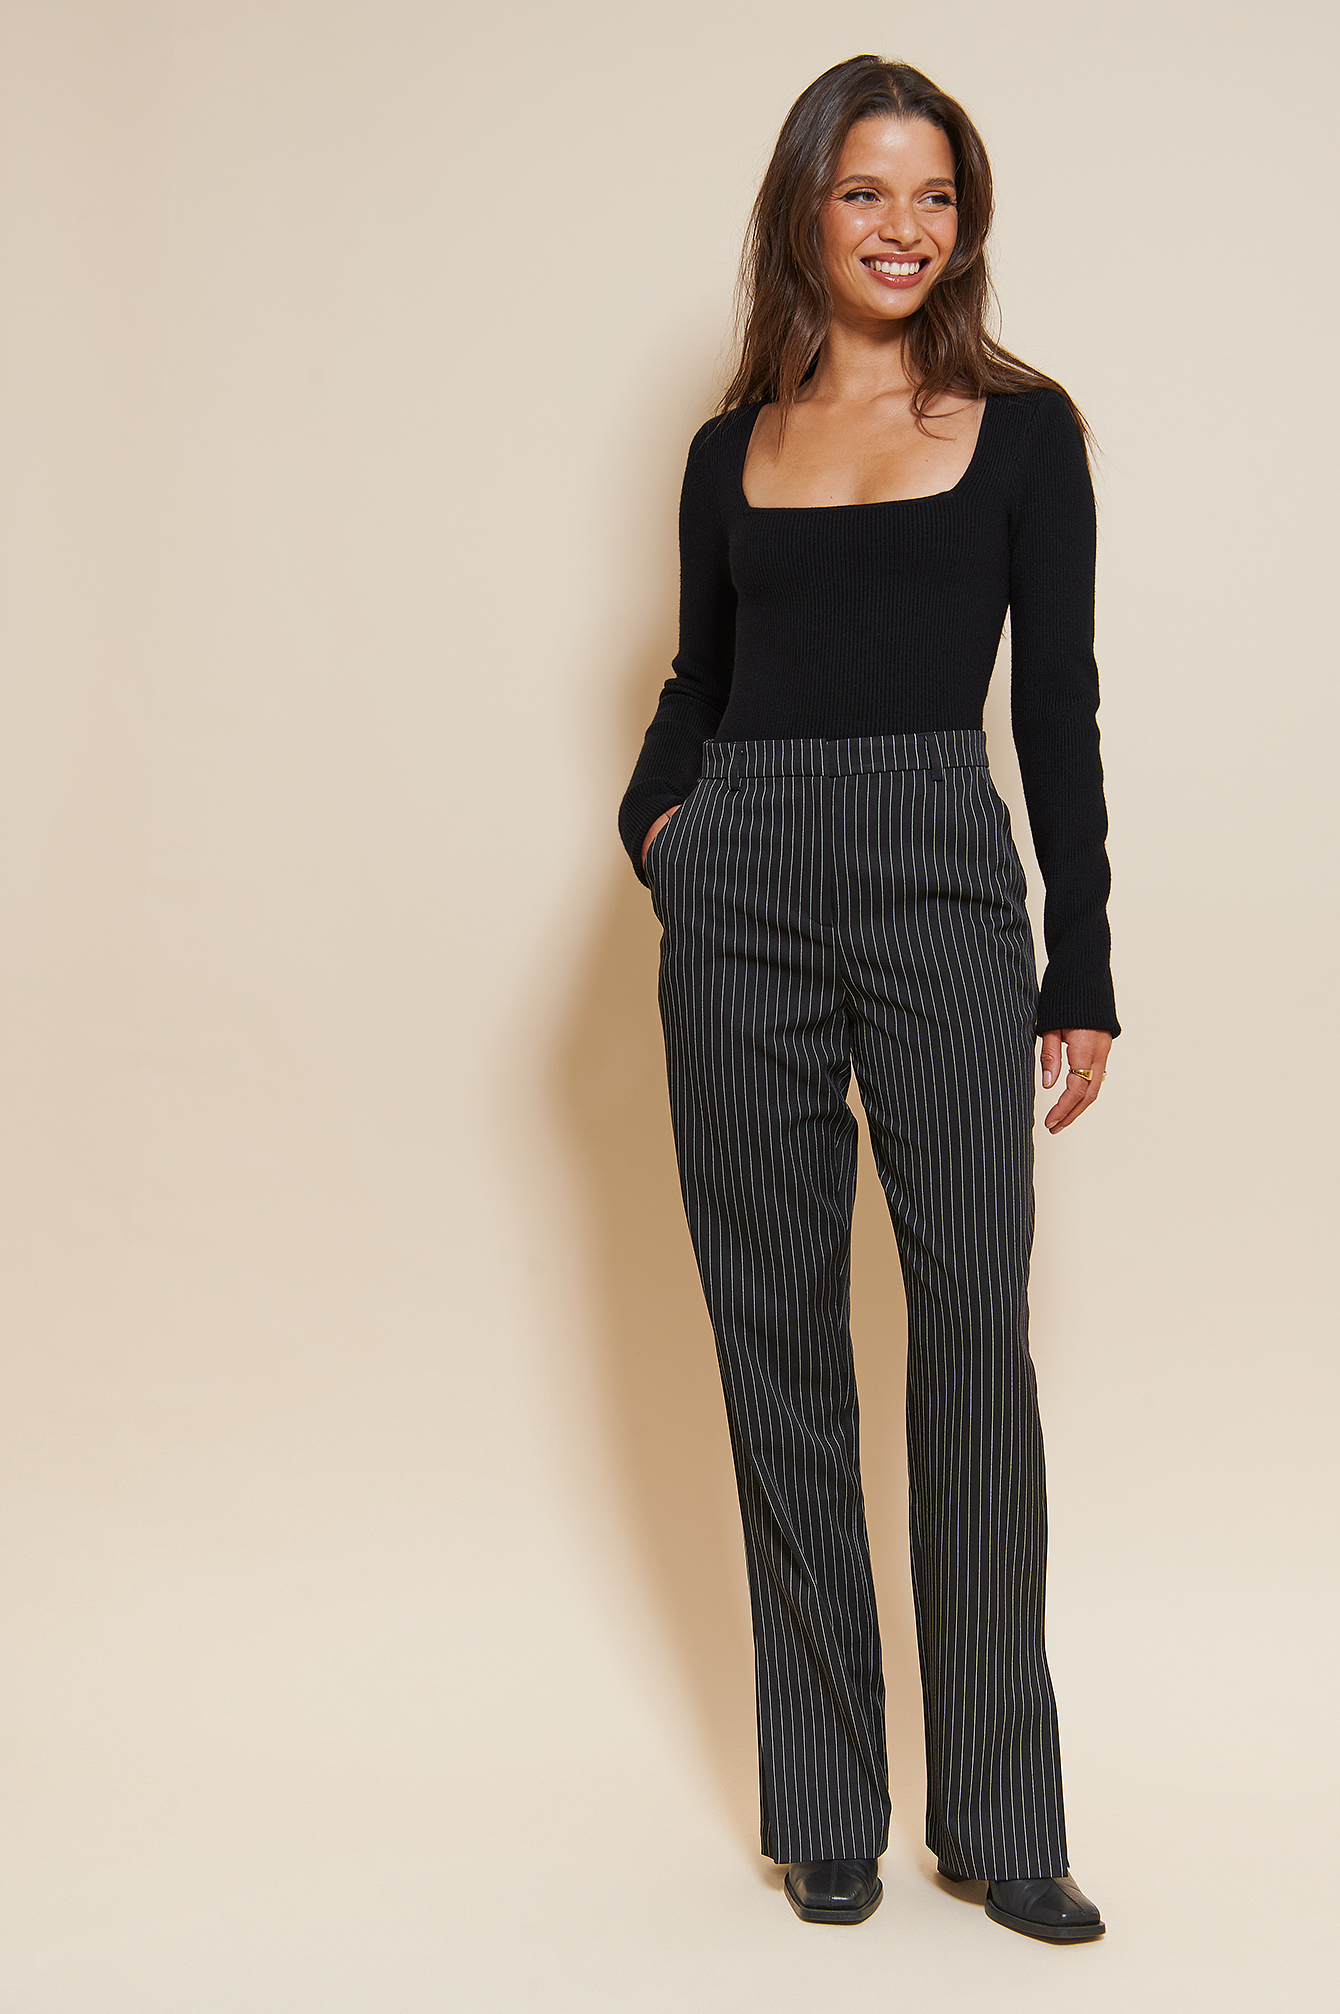 Fashion Trousers Low-Rise Trousers H&M Low-Rise Trousers black striped pattern casual look 